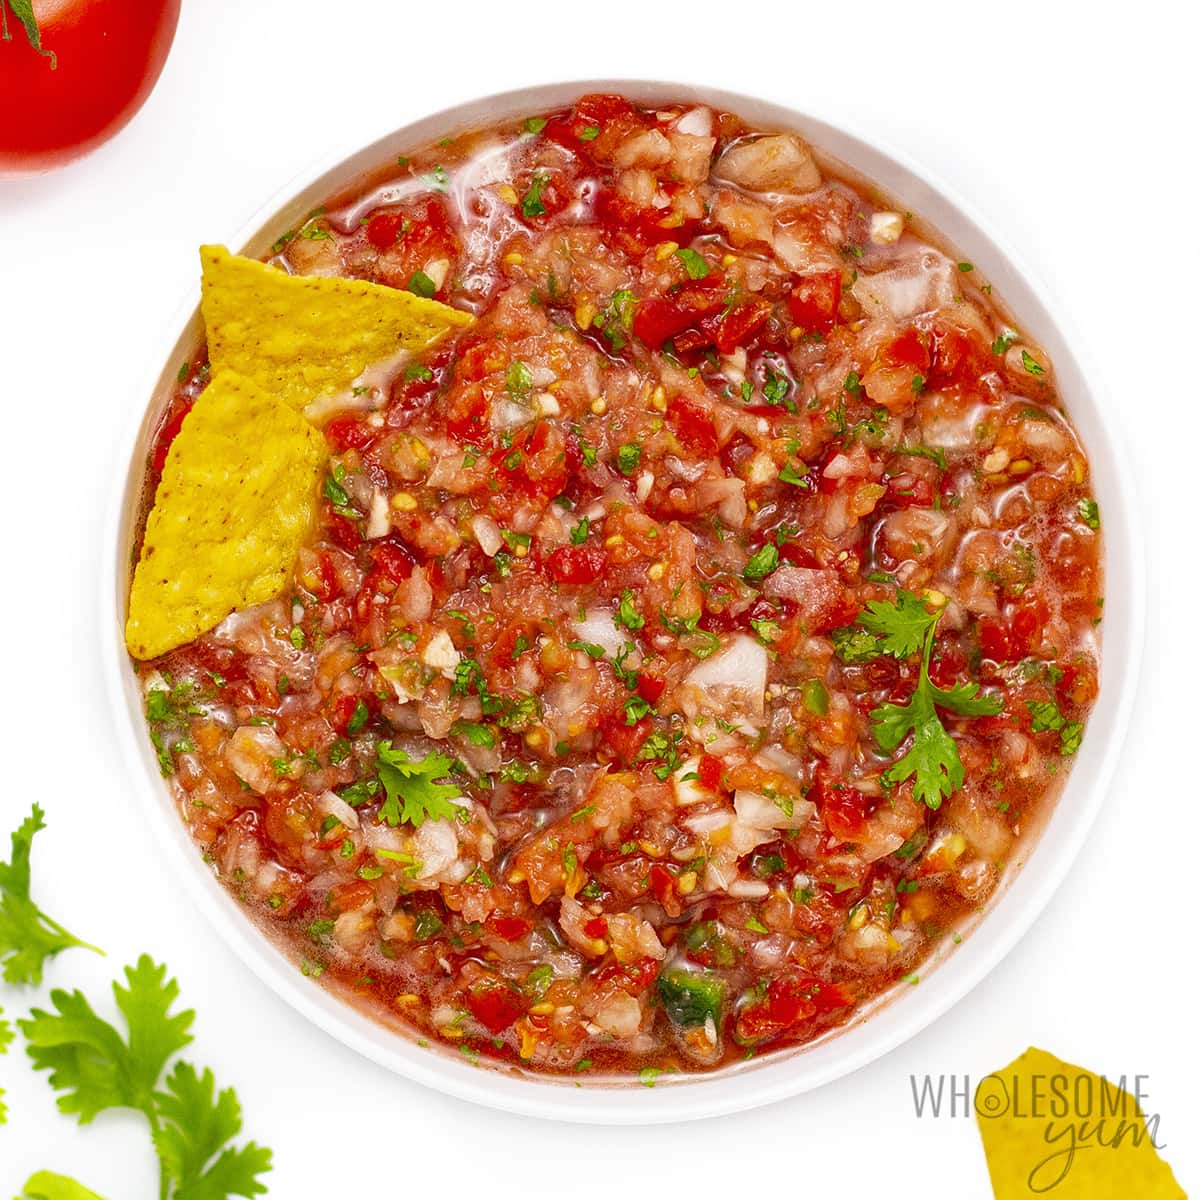 Salsa with fresh tomatoes fully blended and served in a bowl.